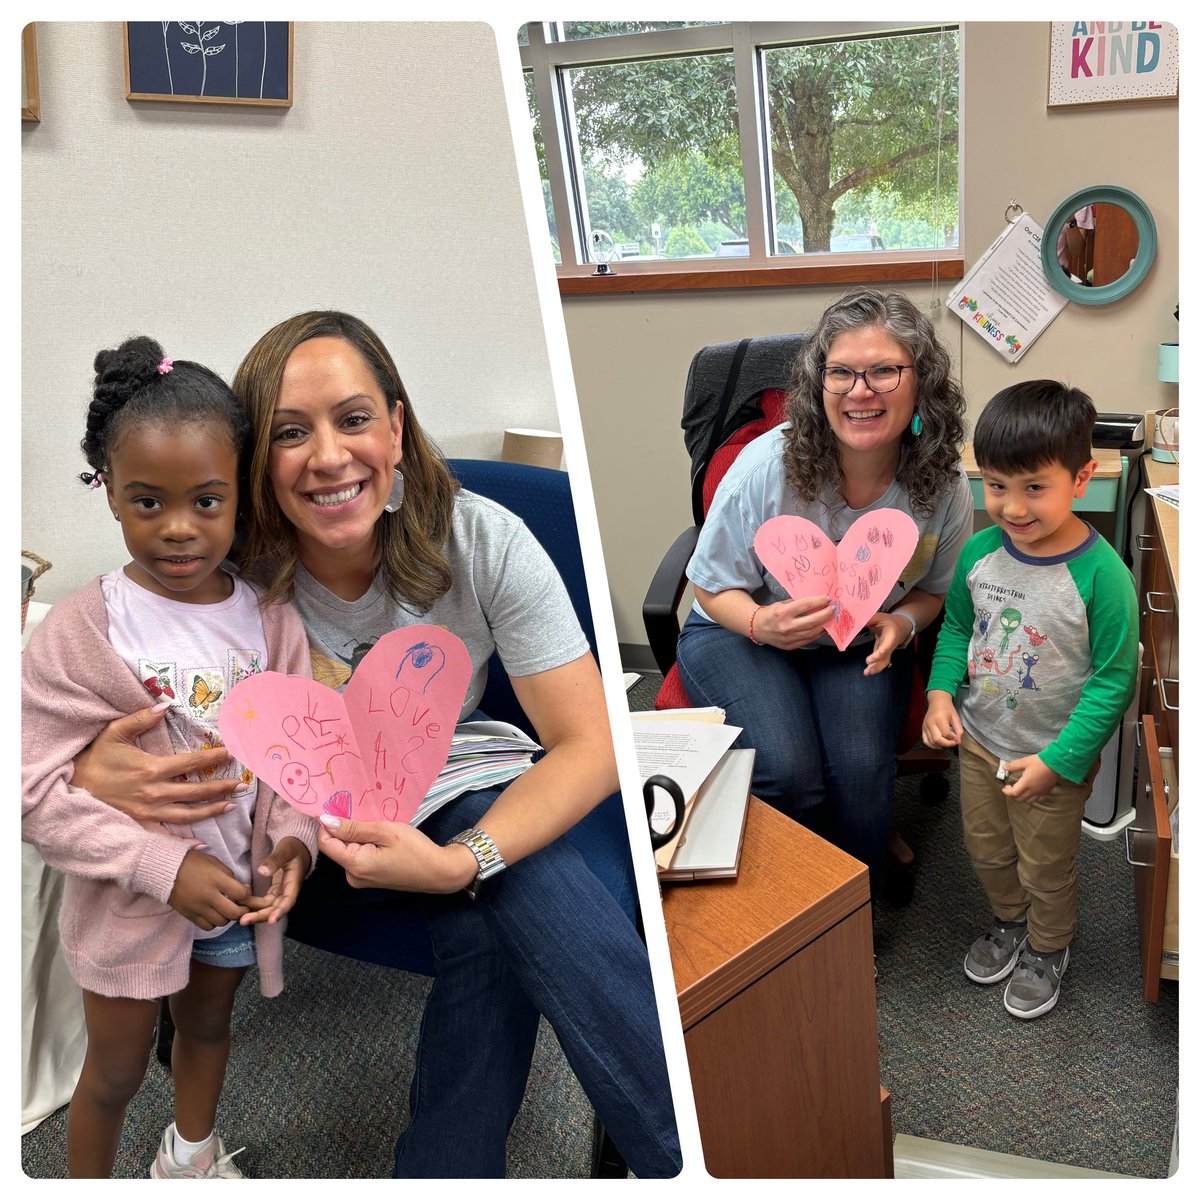 The principal’s at CSE love their Pre-k students! @DrAprudhomme @LiteracyJenny